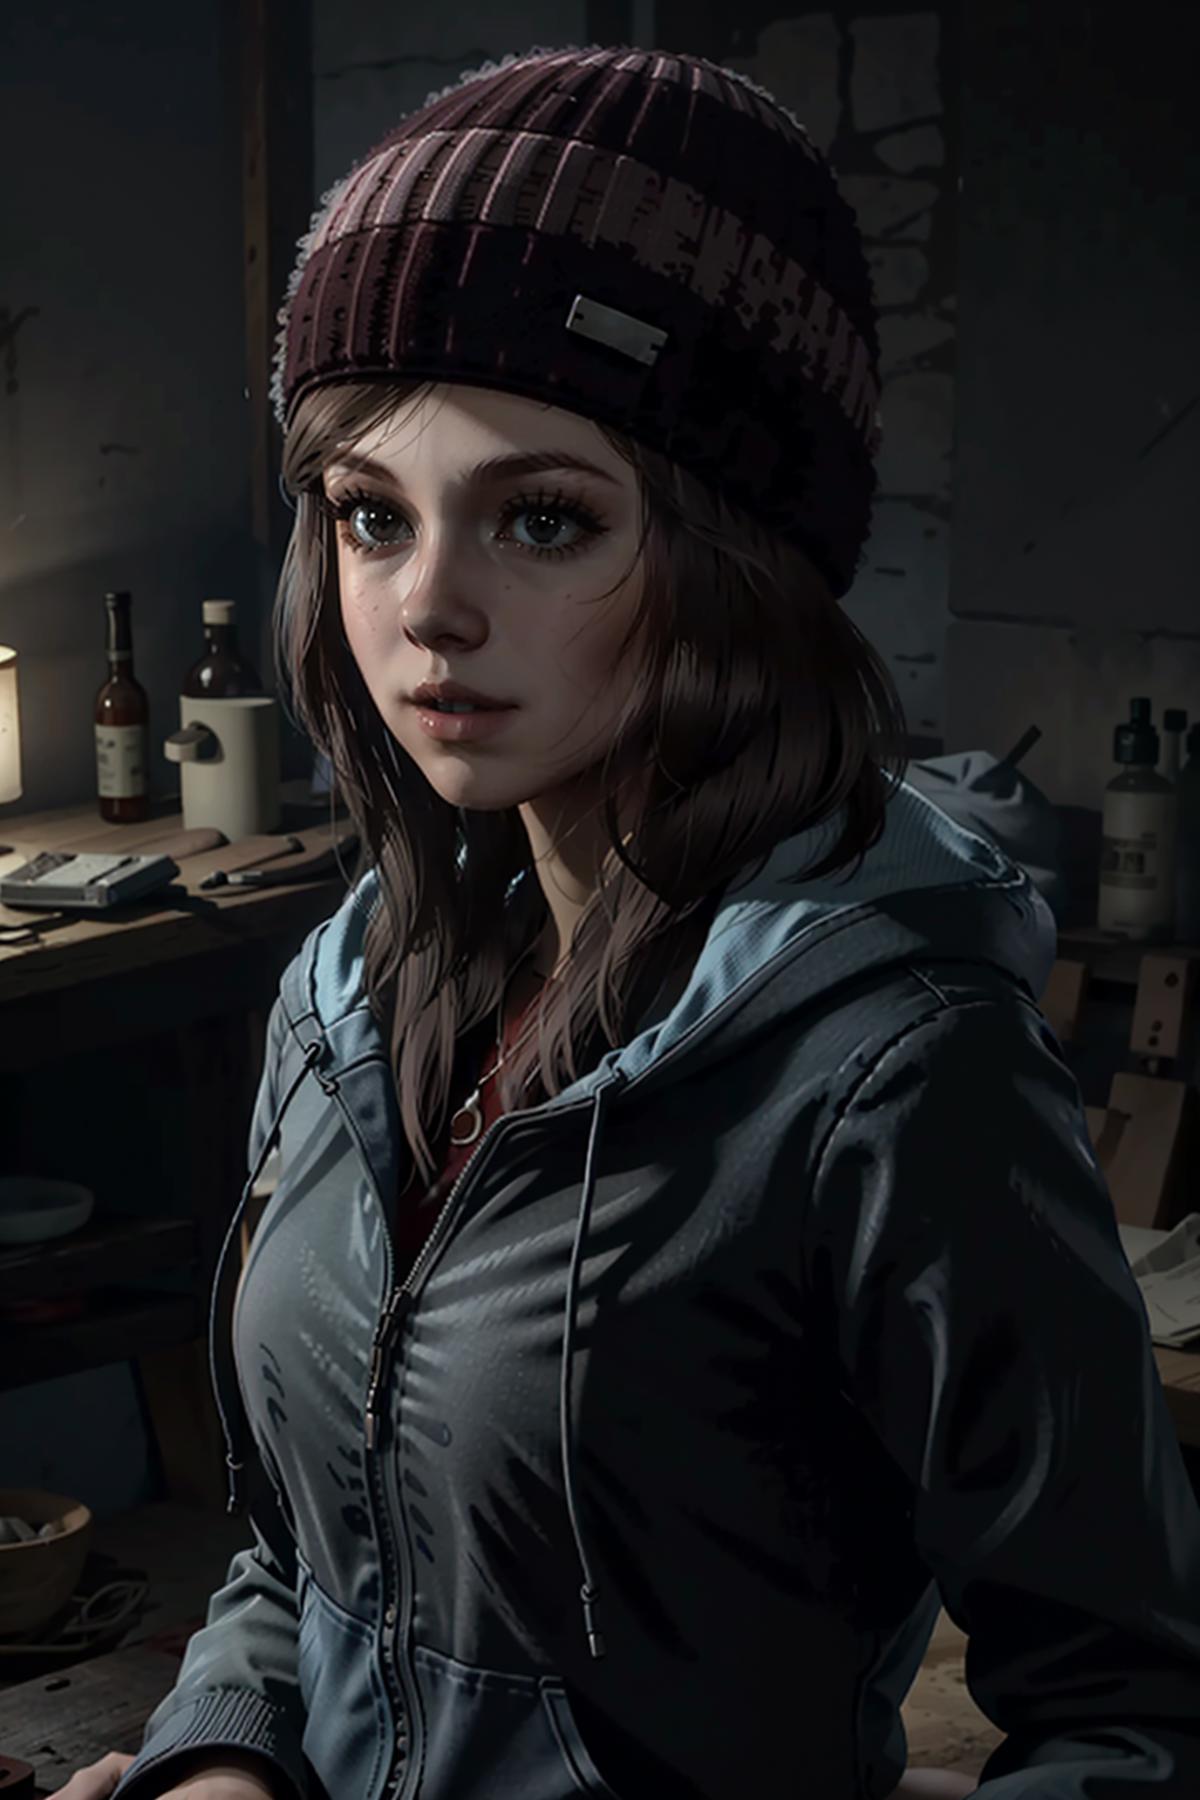 Ashley from Until Dawn image by BloodRedKittie